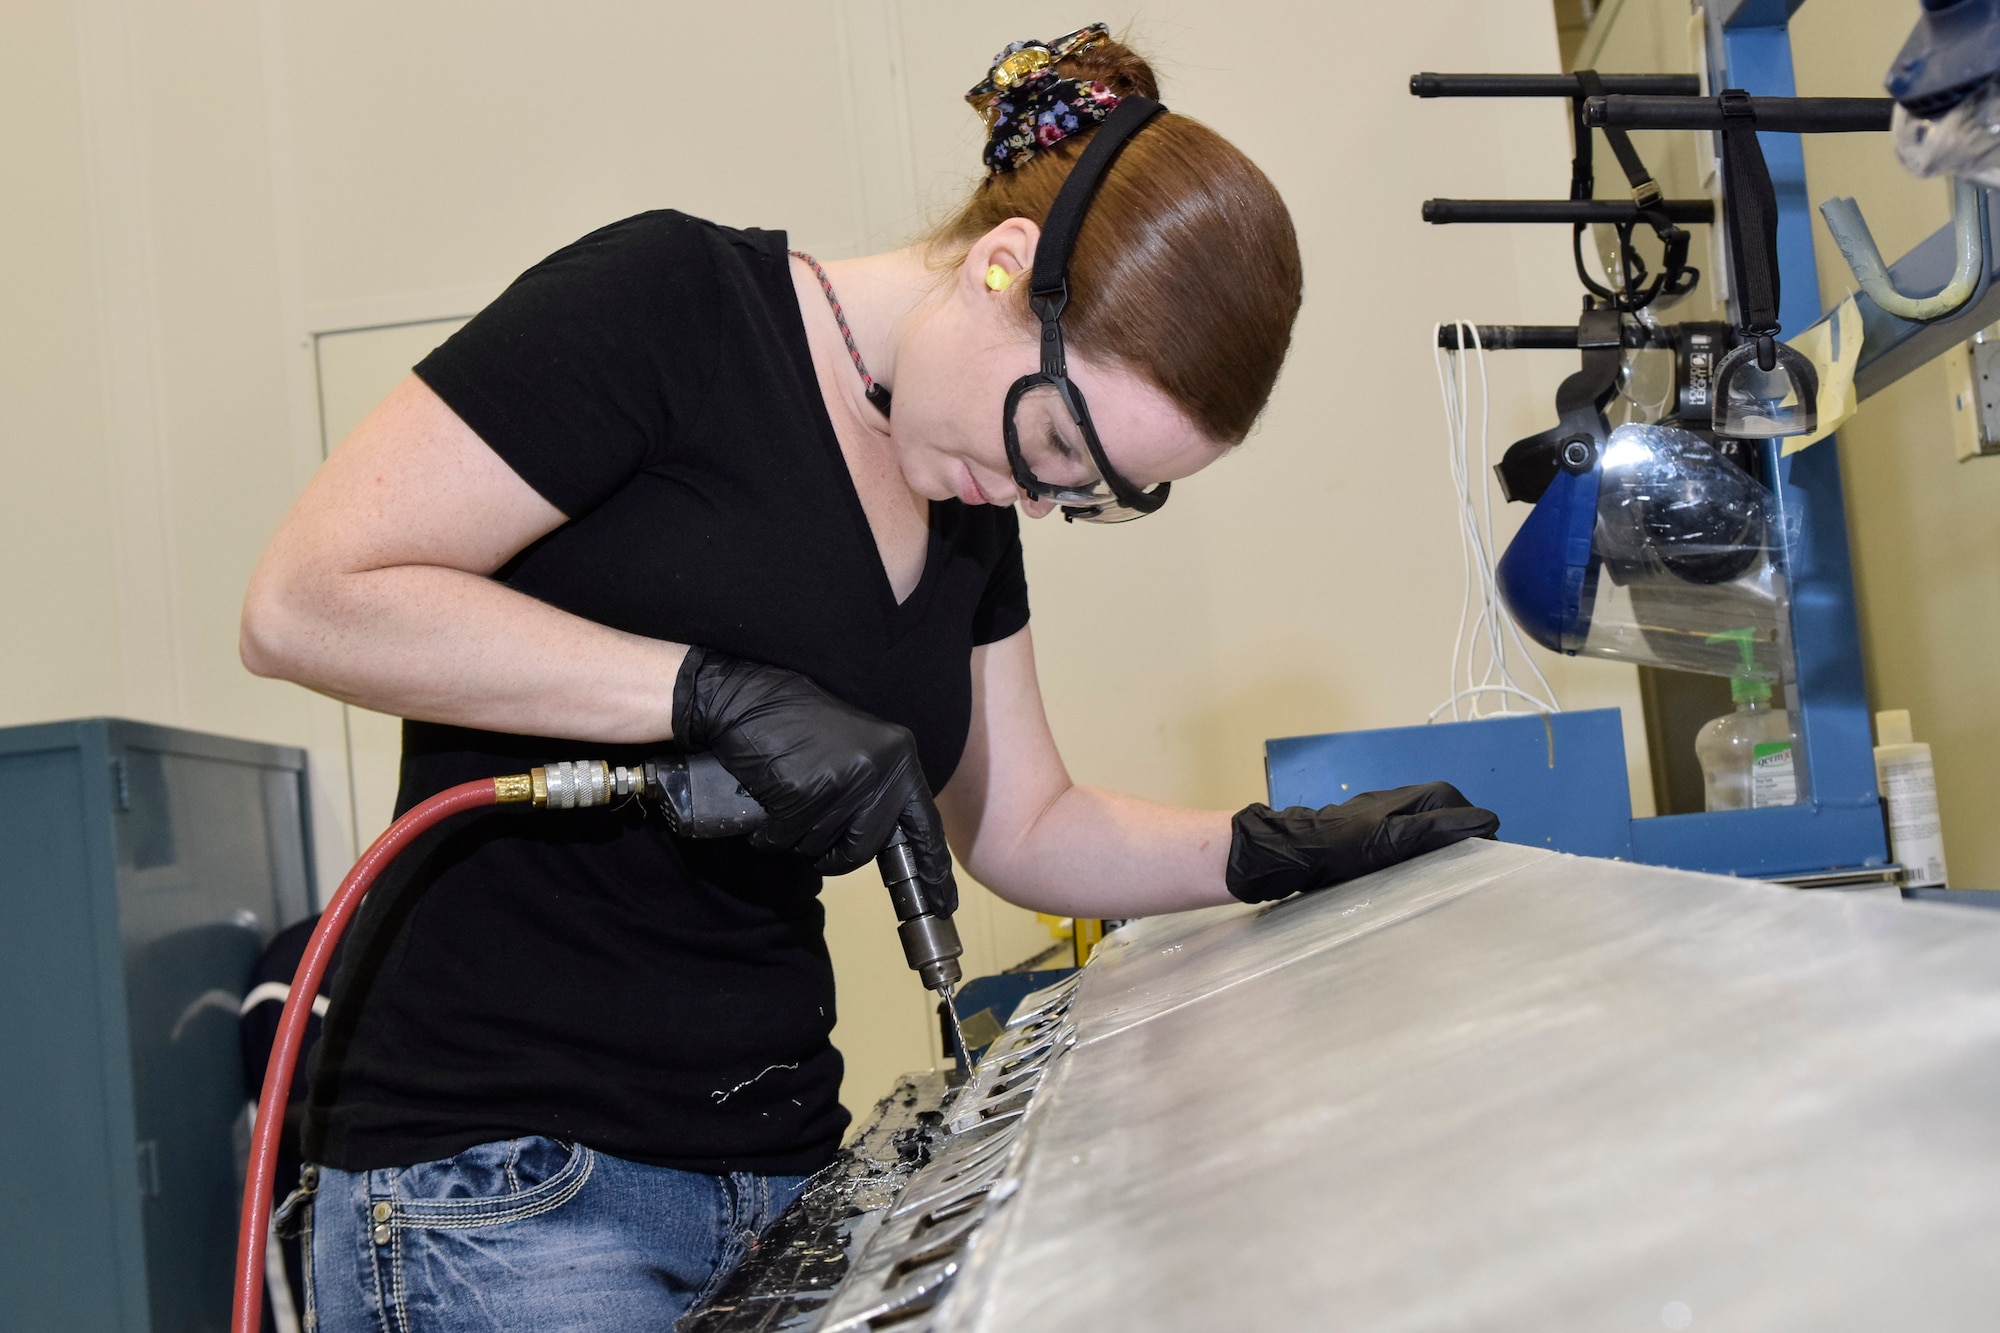 Sarah Holshouser, 553rd Commodities Maintenance Squadron composite fabricator, drills out rivets on a KC-135 aileron she is overhauling at the Oklahoma City Air Logistics Complex, July 25, 2016, Tinker Air Force Base, Okla. The 553rd CMMXS manufactures and maintains components for KC-135, B-1B, B-52H, E-3 and E-6 aircraft.  (U.S. Air Force photo/Greg L. Davis)